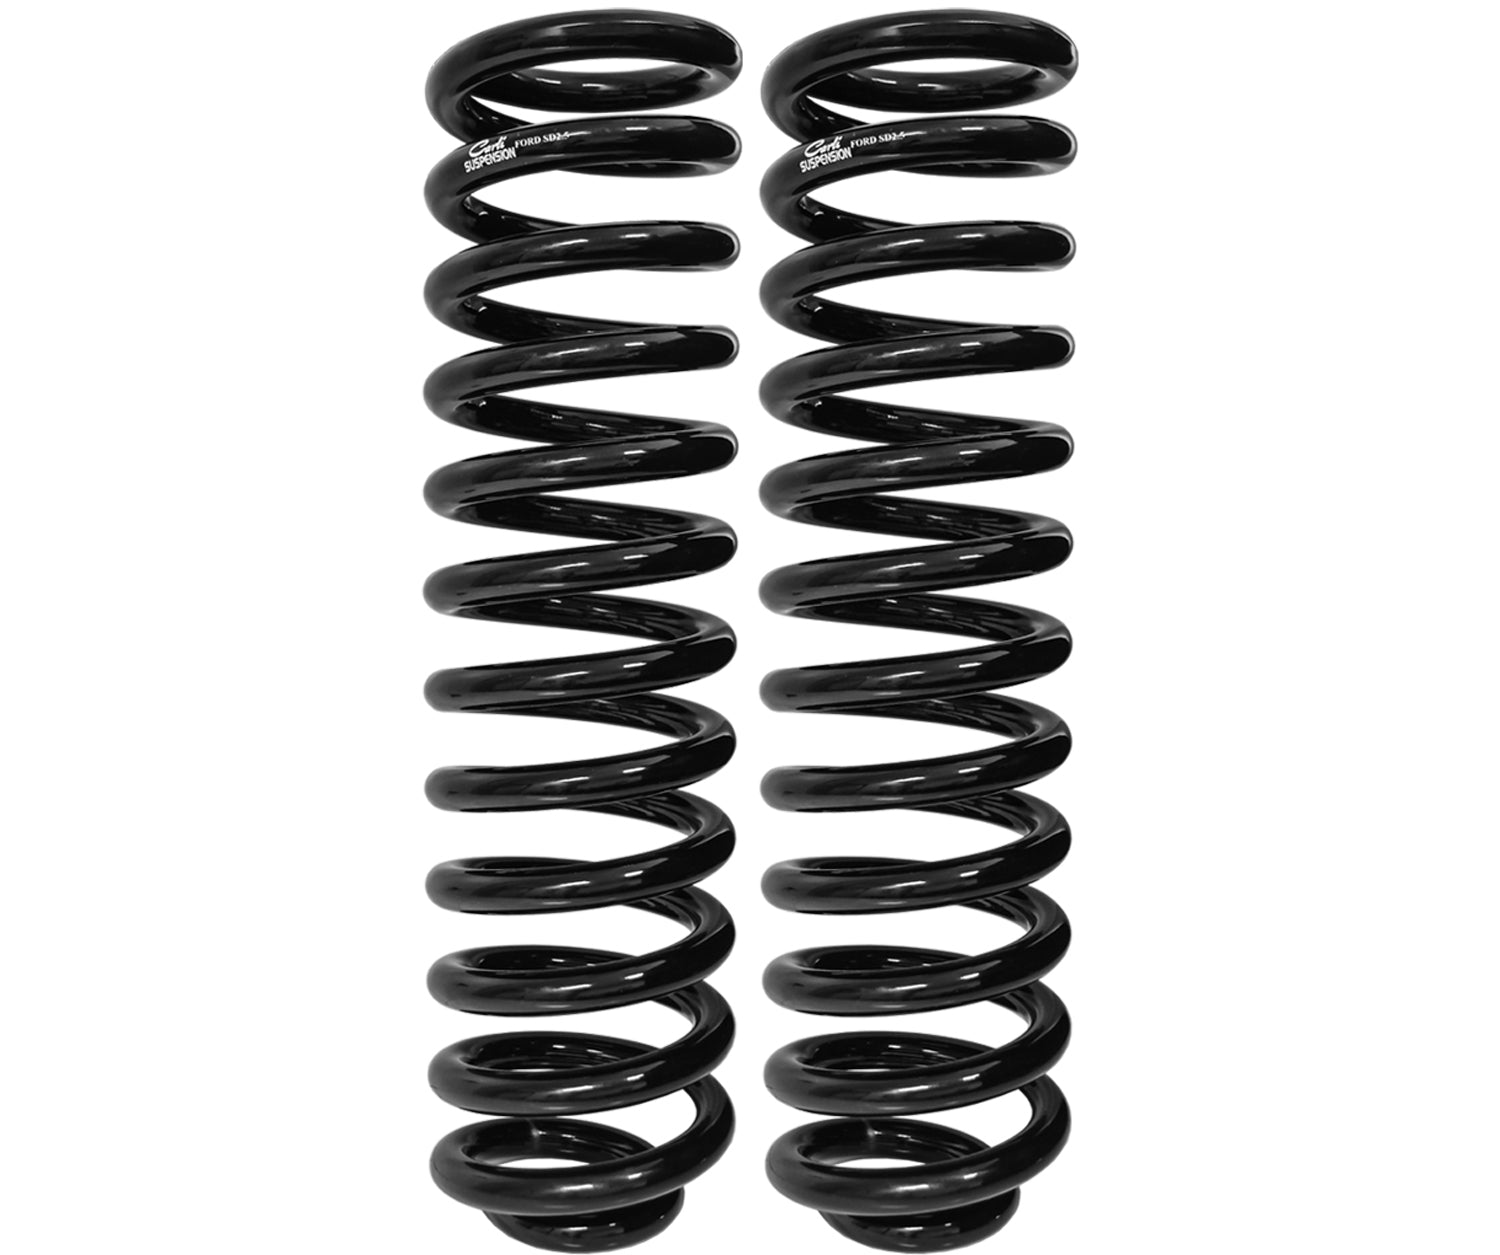 Carli Suspension CS-FLC-05 2.5 inch/3.5 inch Lift Linear Rate Coils